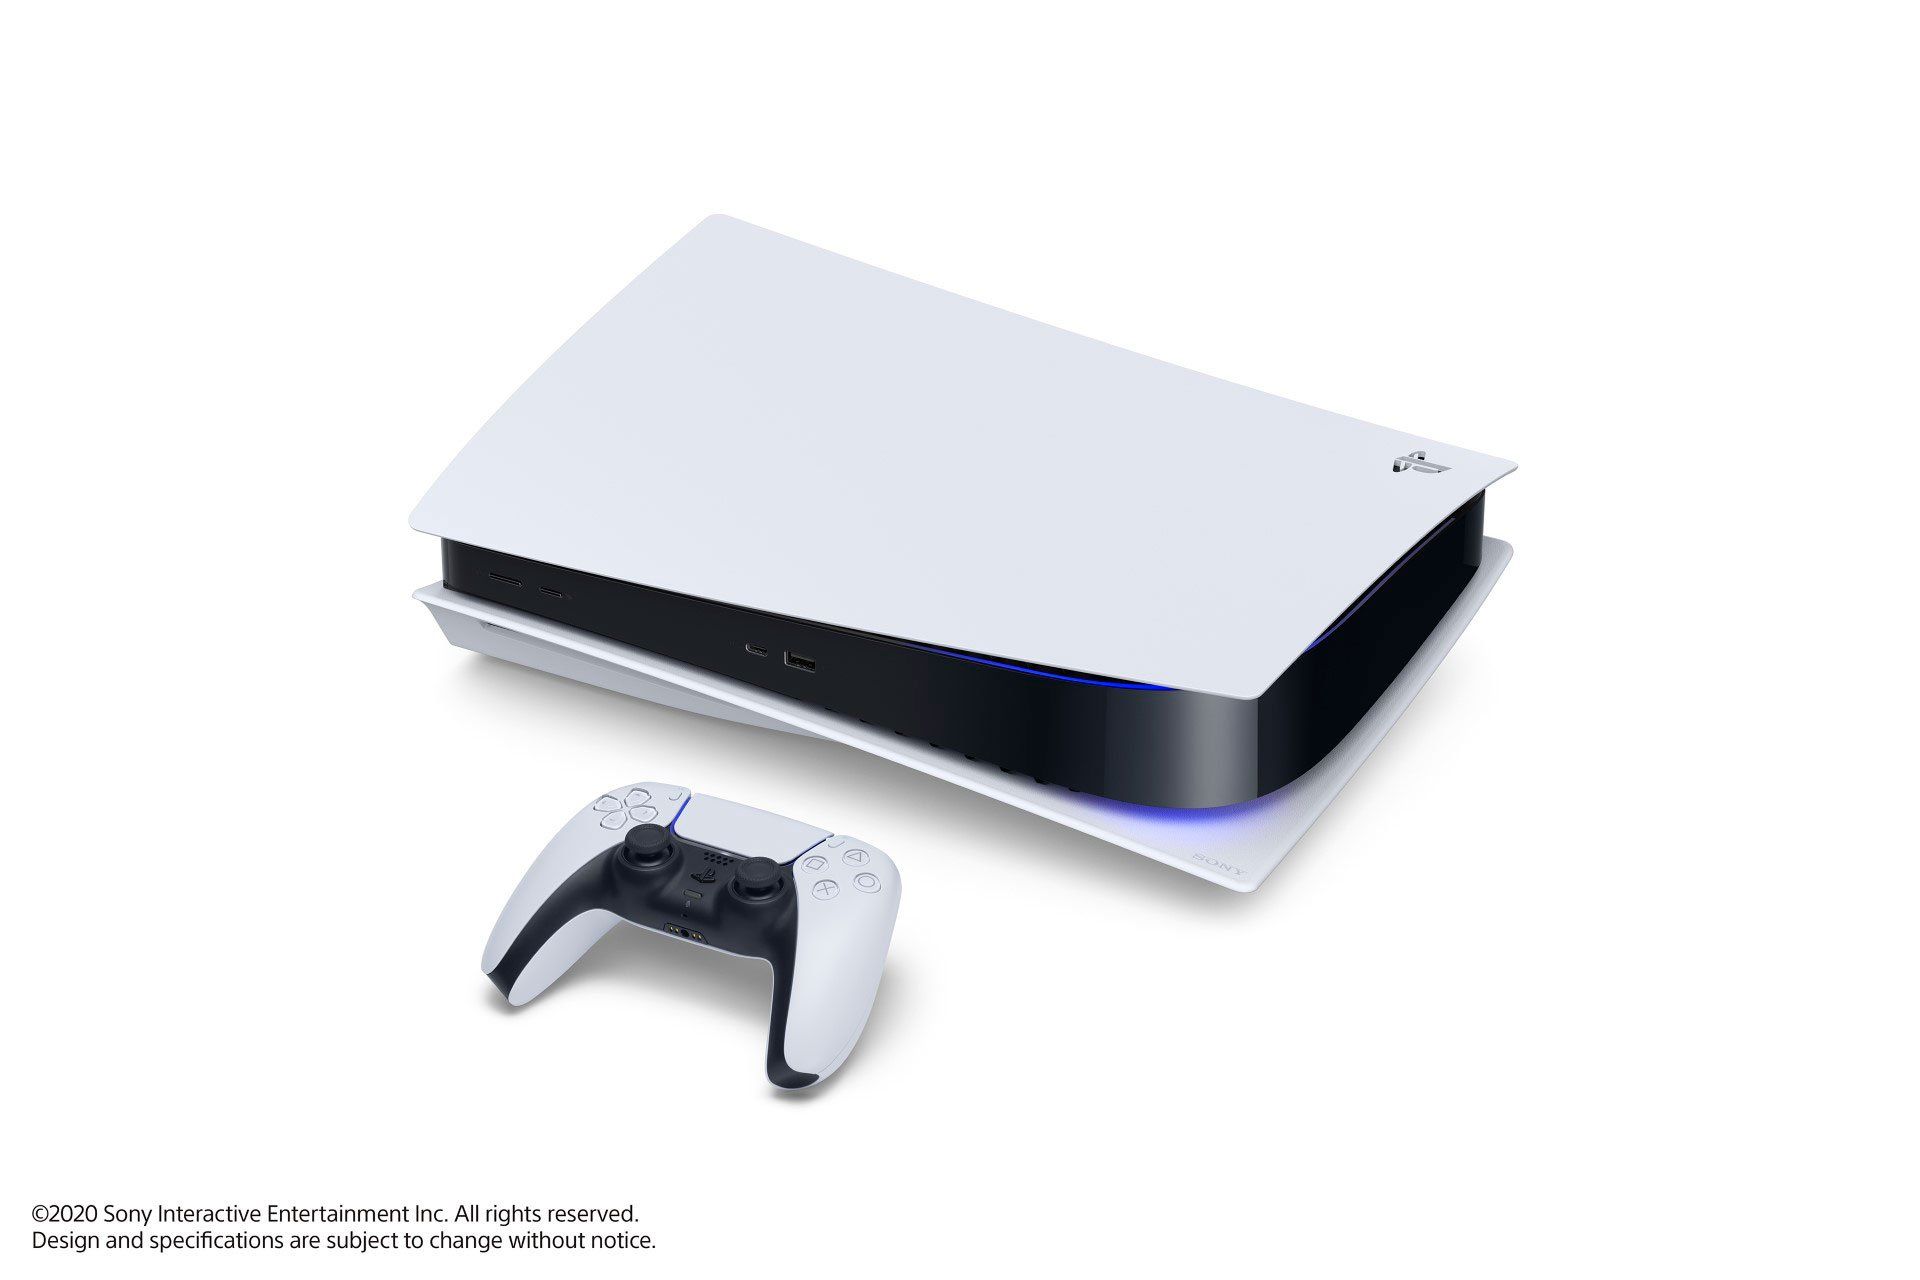 Here Are Hi Res Image Of The PS5 And Its Peripherals